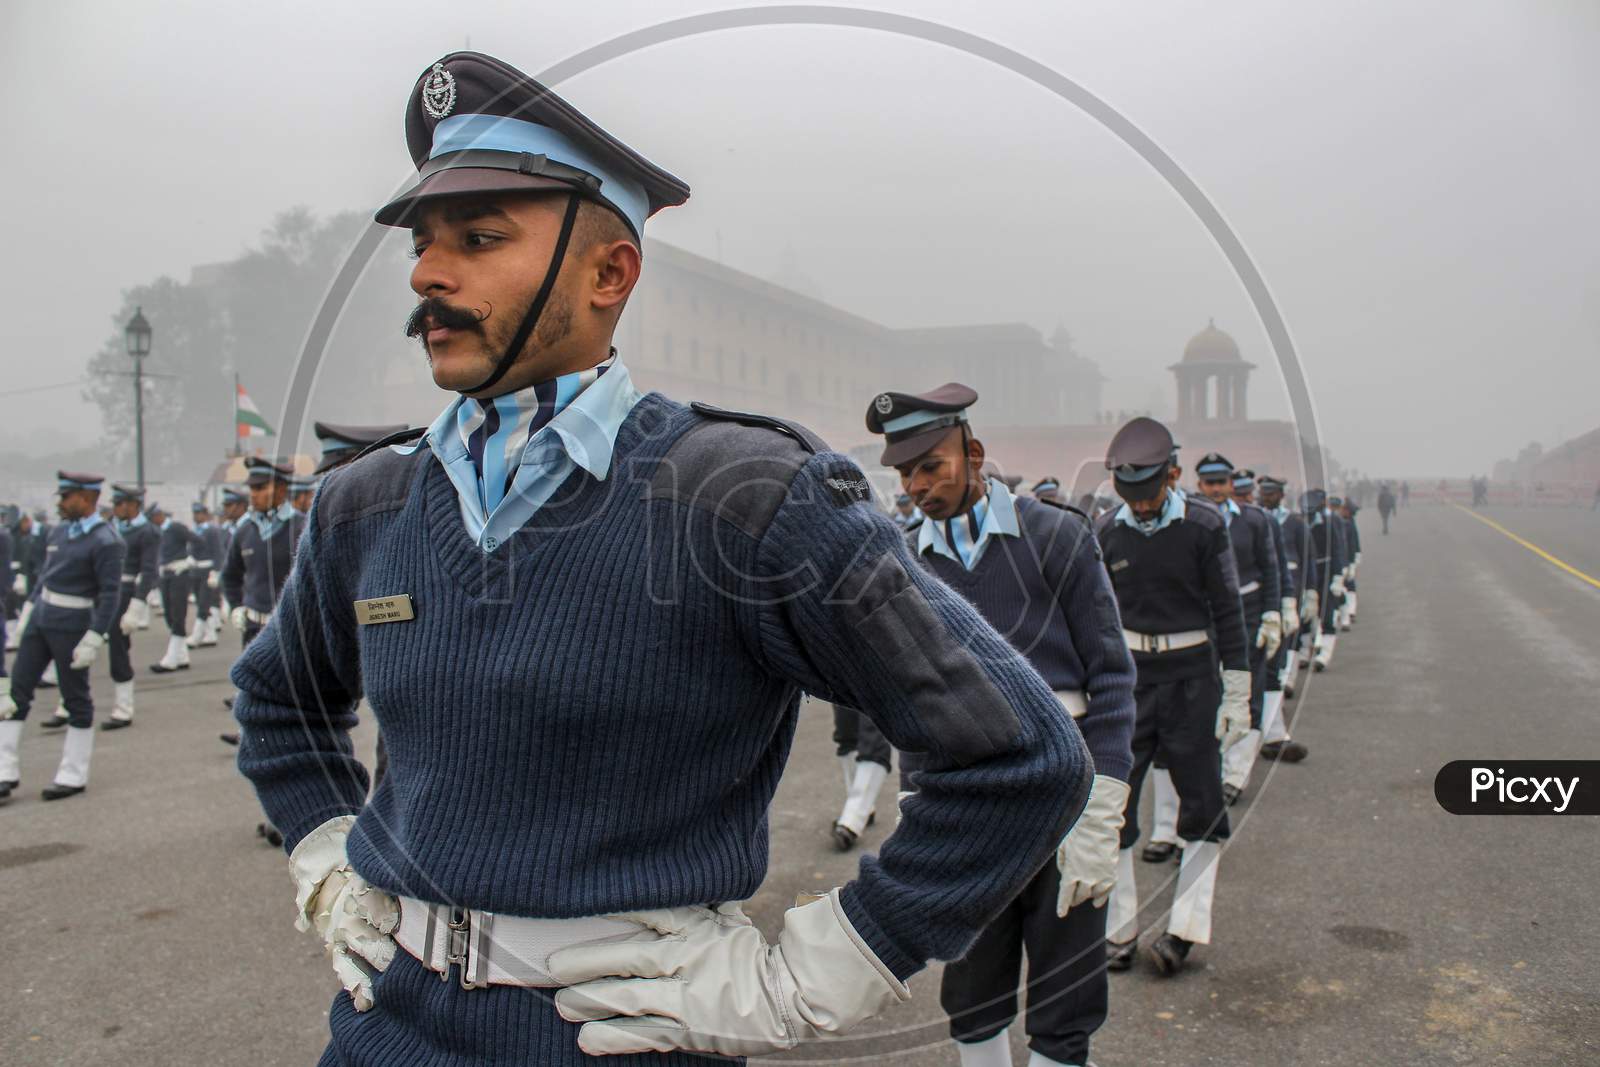 India Gate, New Delhi, India, January-2020: Soldiers Of Indian Army Marching At Rajpath.A Ceremonial Boulevard As They Take Part In Rehearsal Activities For The Republic Day Parade.